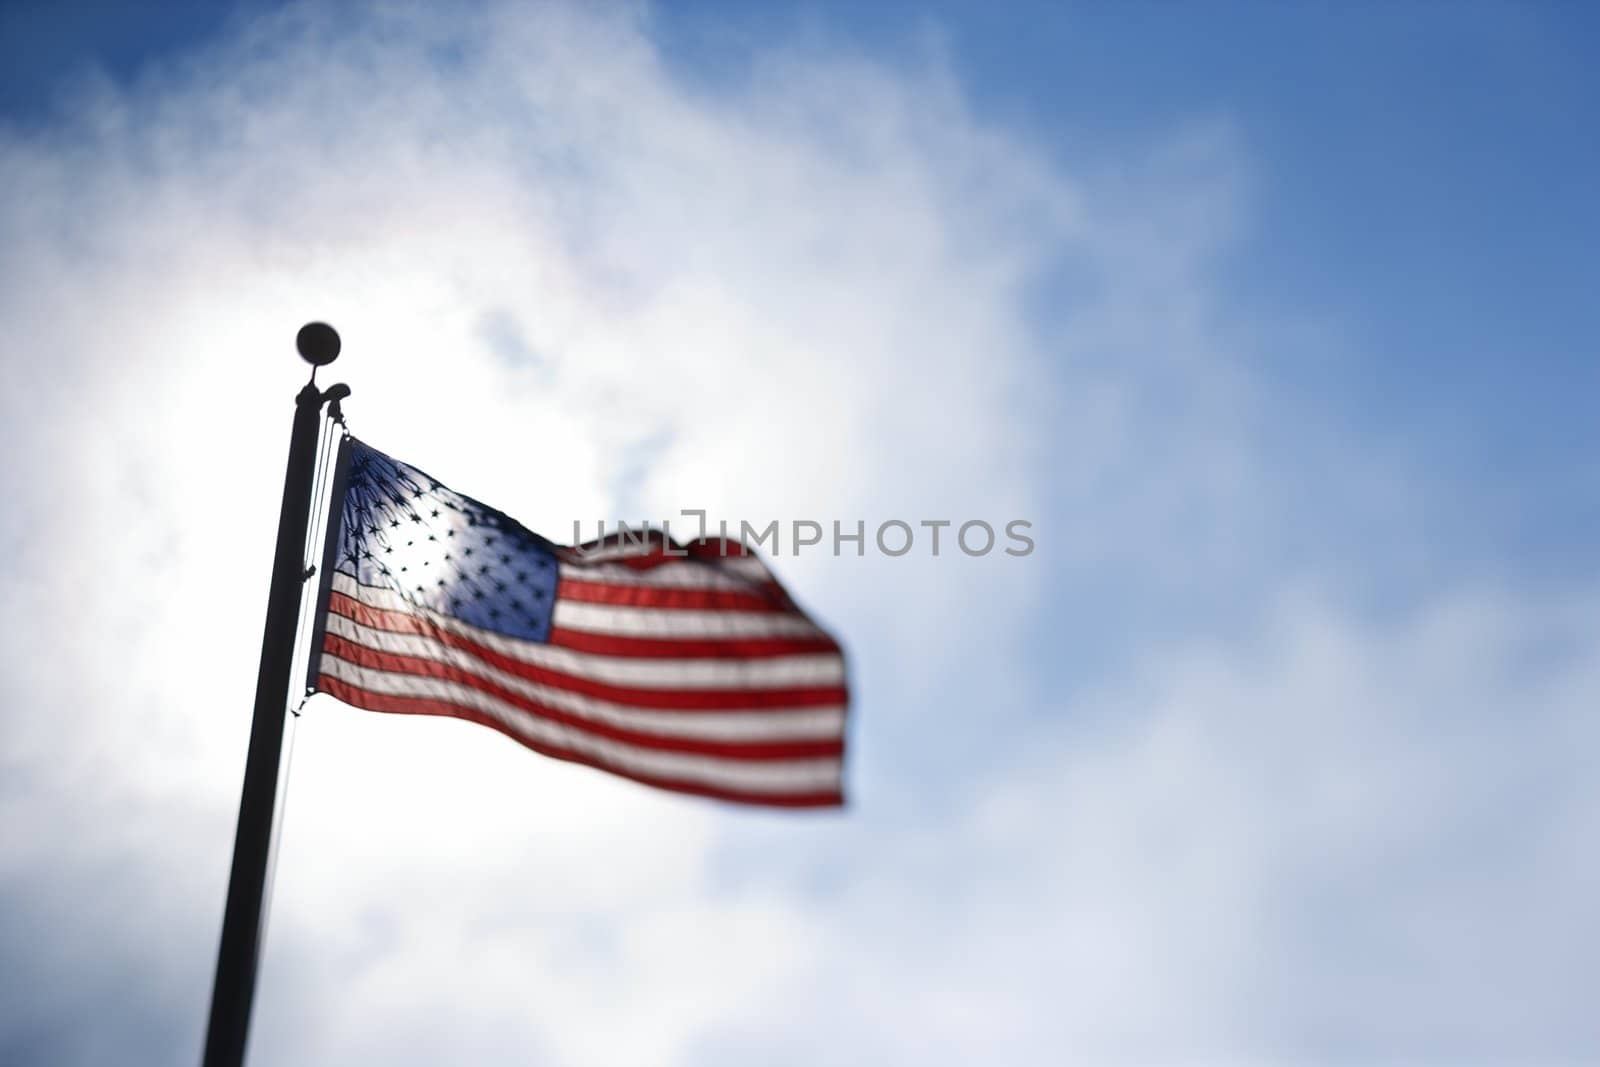 American flag blowing in breeze against blue sky.